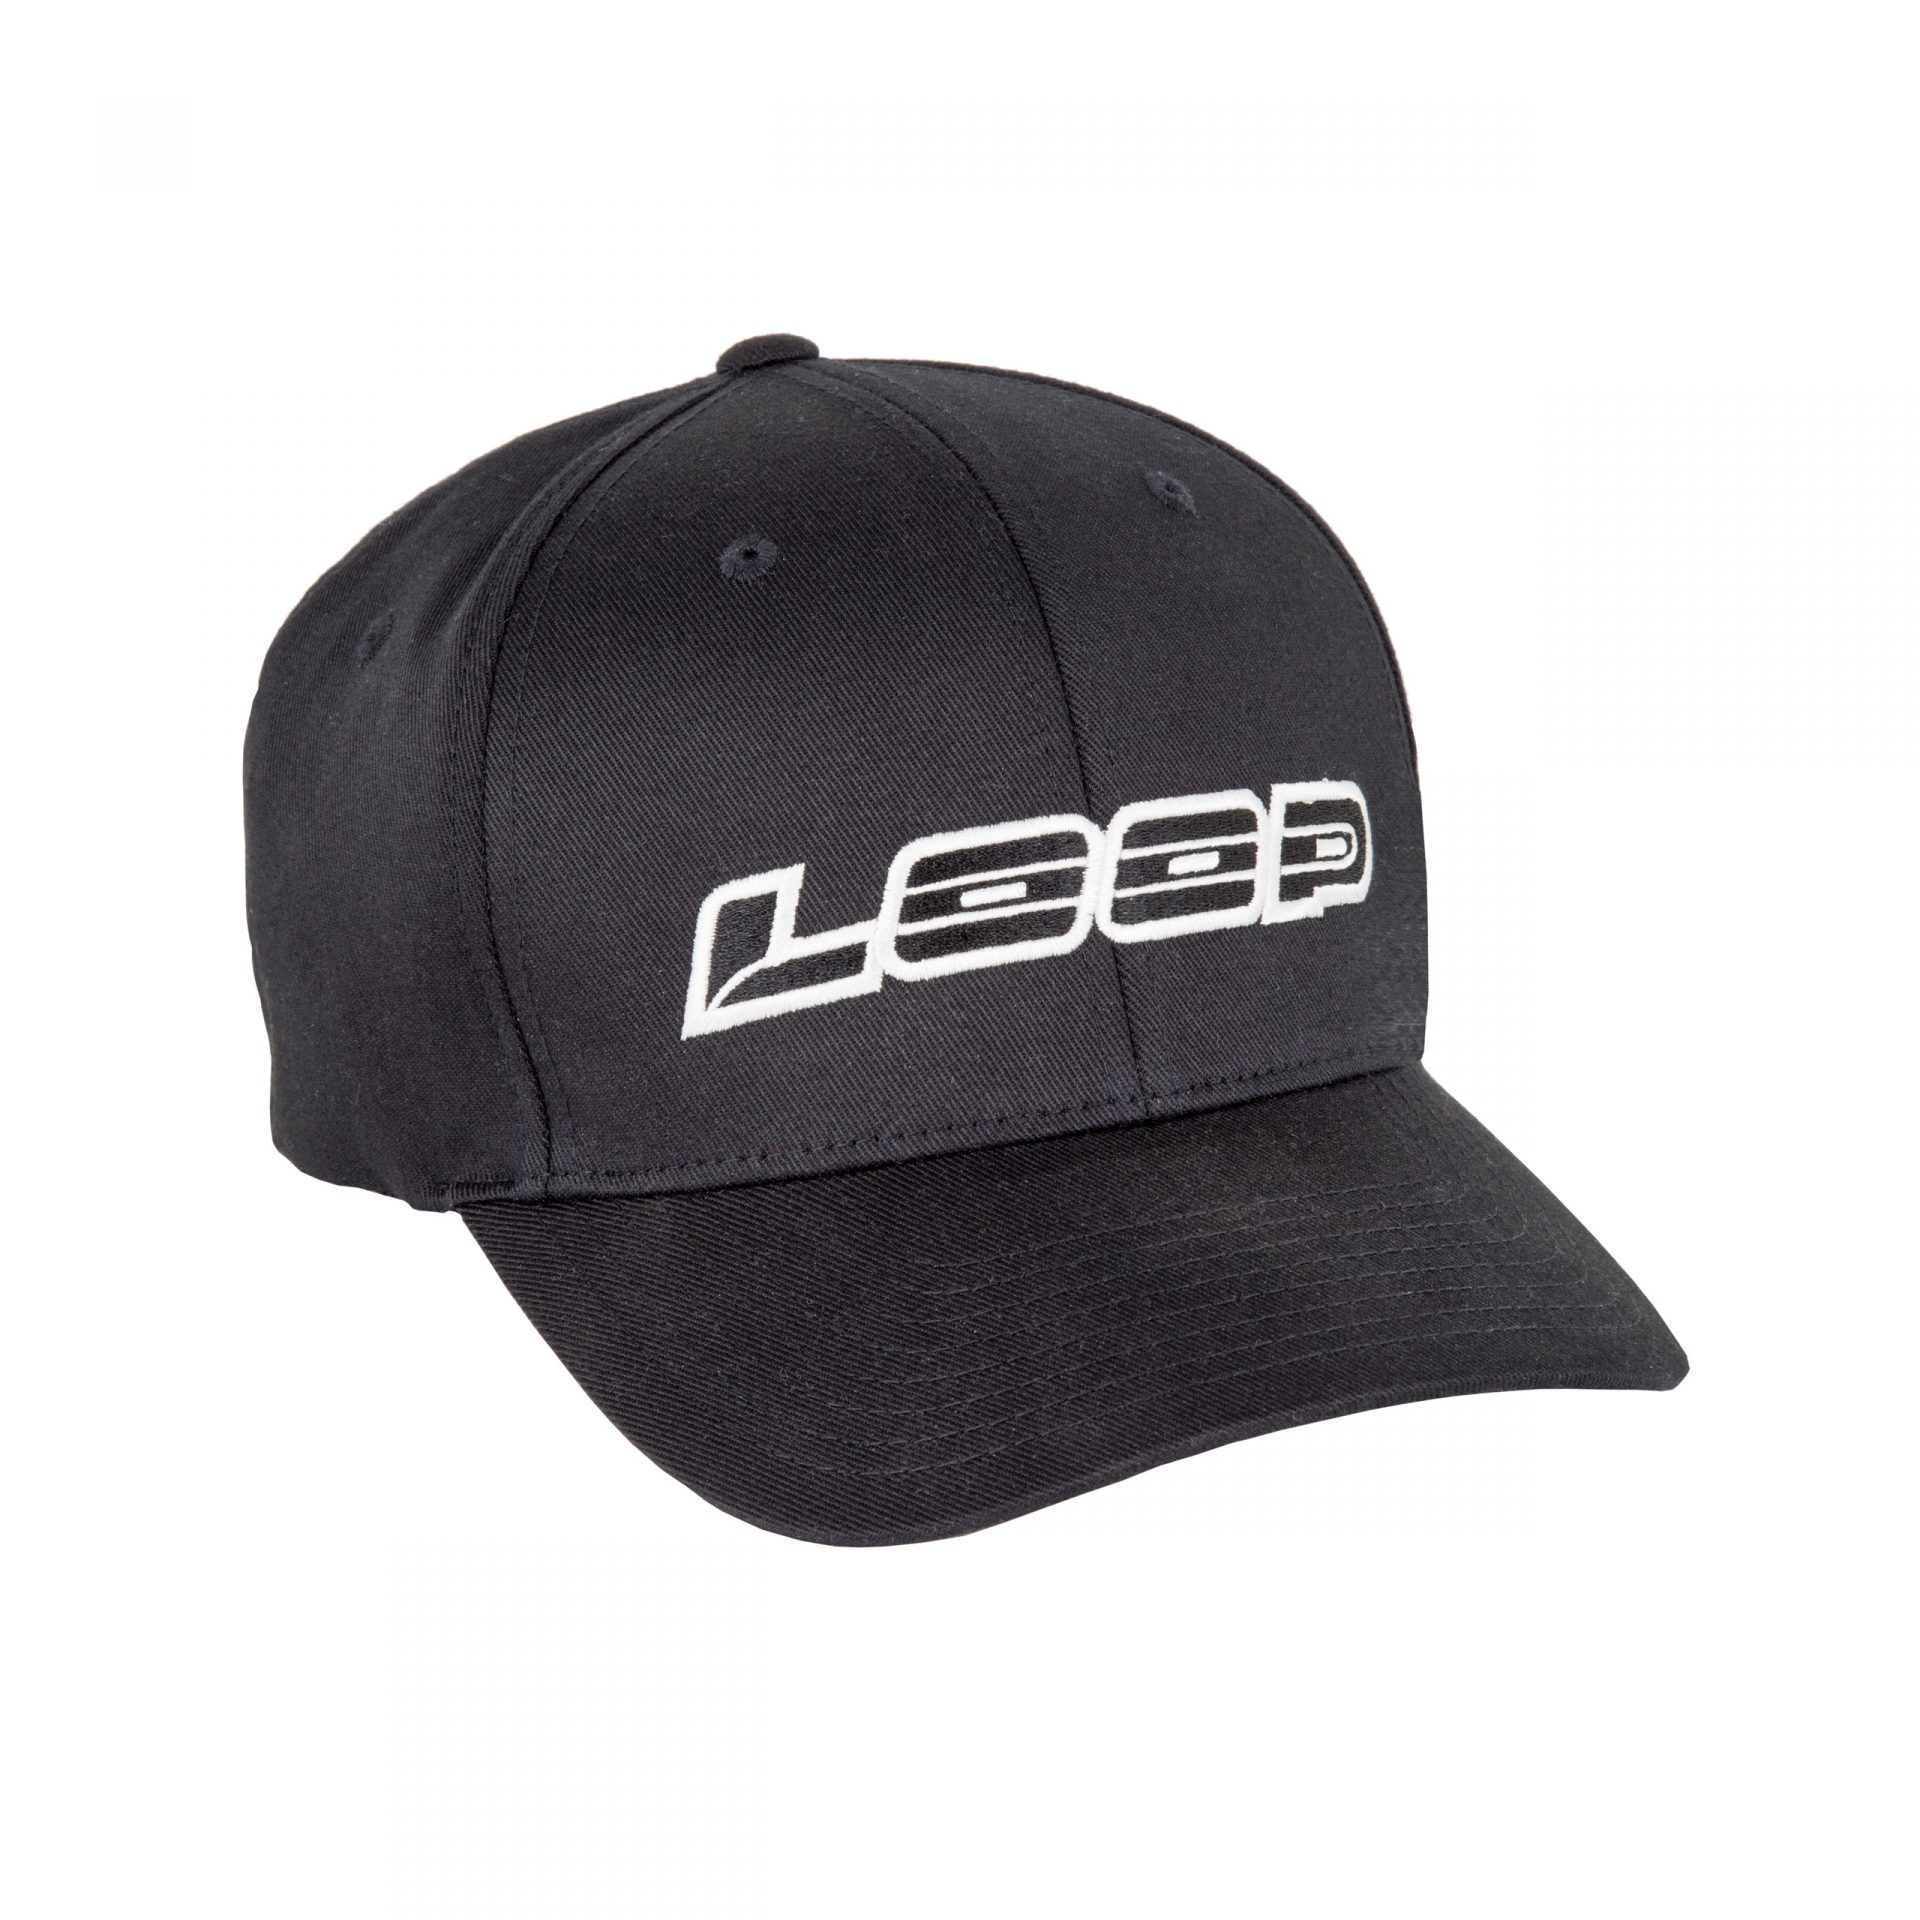 Loop Logo Flexfit Cap Black - Pacific Rivers Outfitting Company